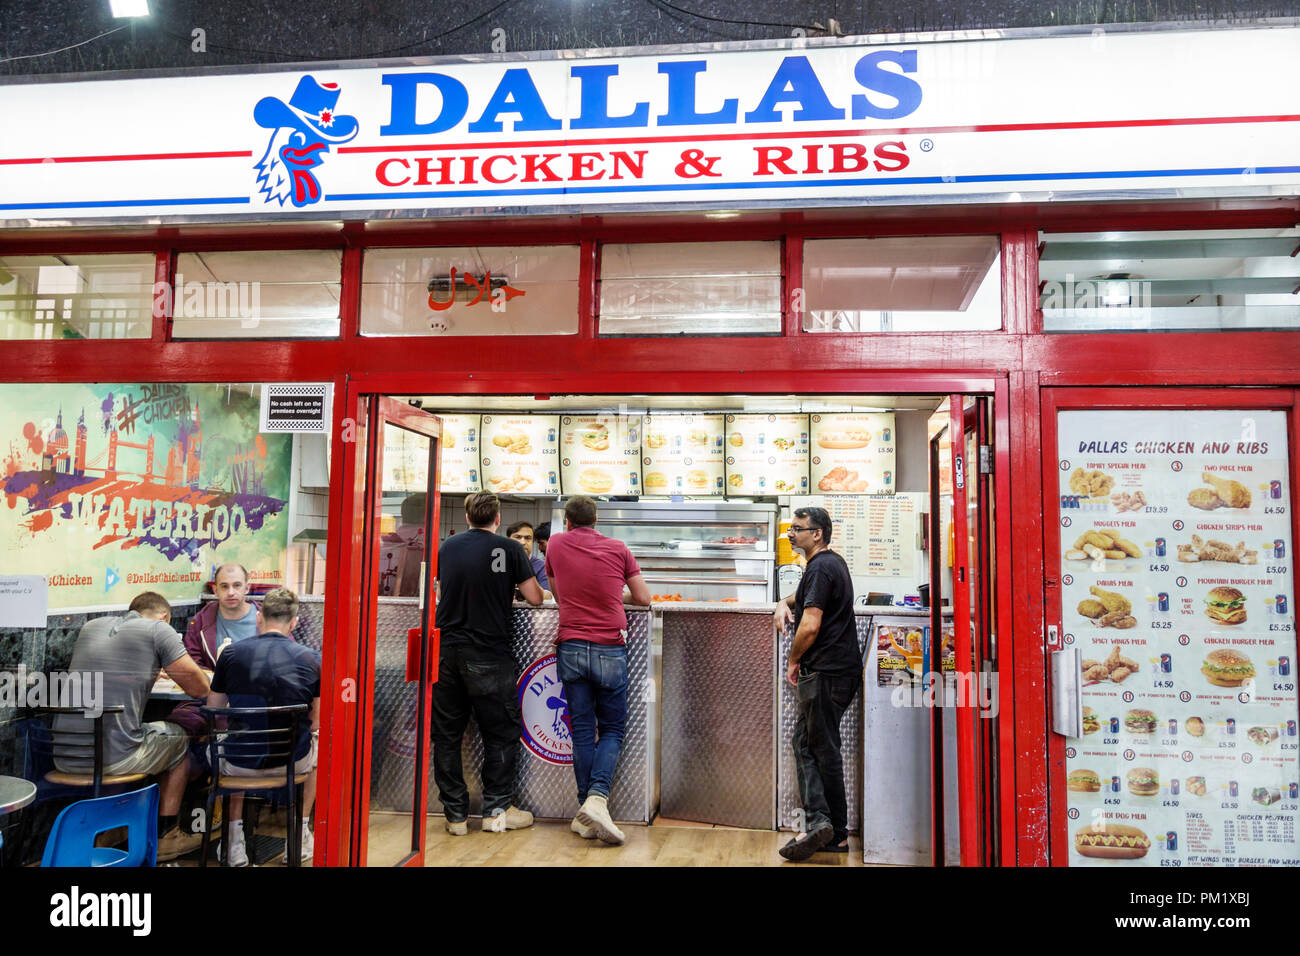 London England,UK,South Bank,Waterloo,Dallas Chicken & Ribs,restaurant restaurants food dining cafe cafes,dining,Halal fast food take-away,entrance,ex Stock Photo